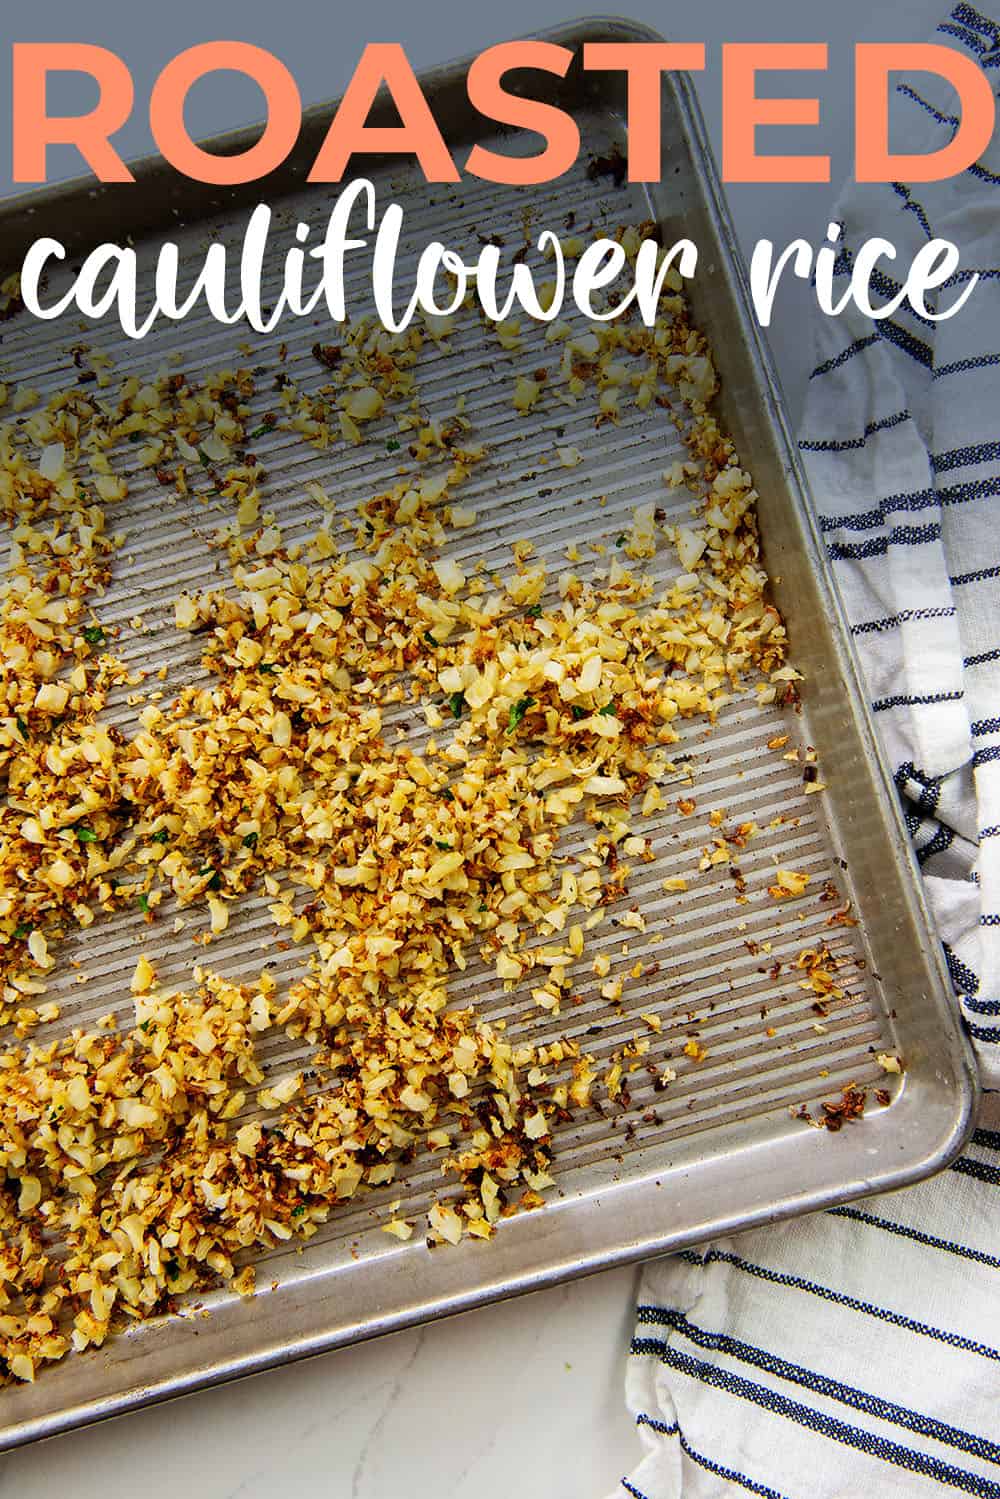 roasted cauliflower rice on sheet pan with text for Pinterest.